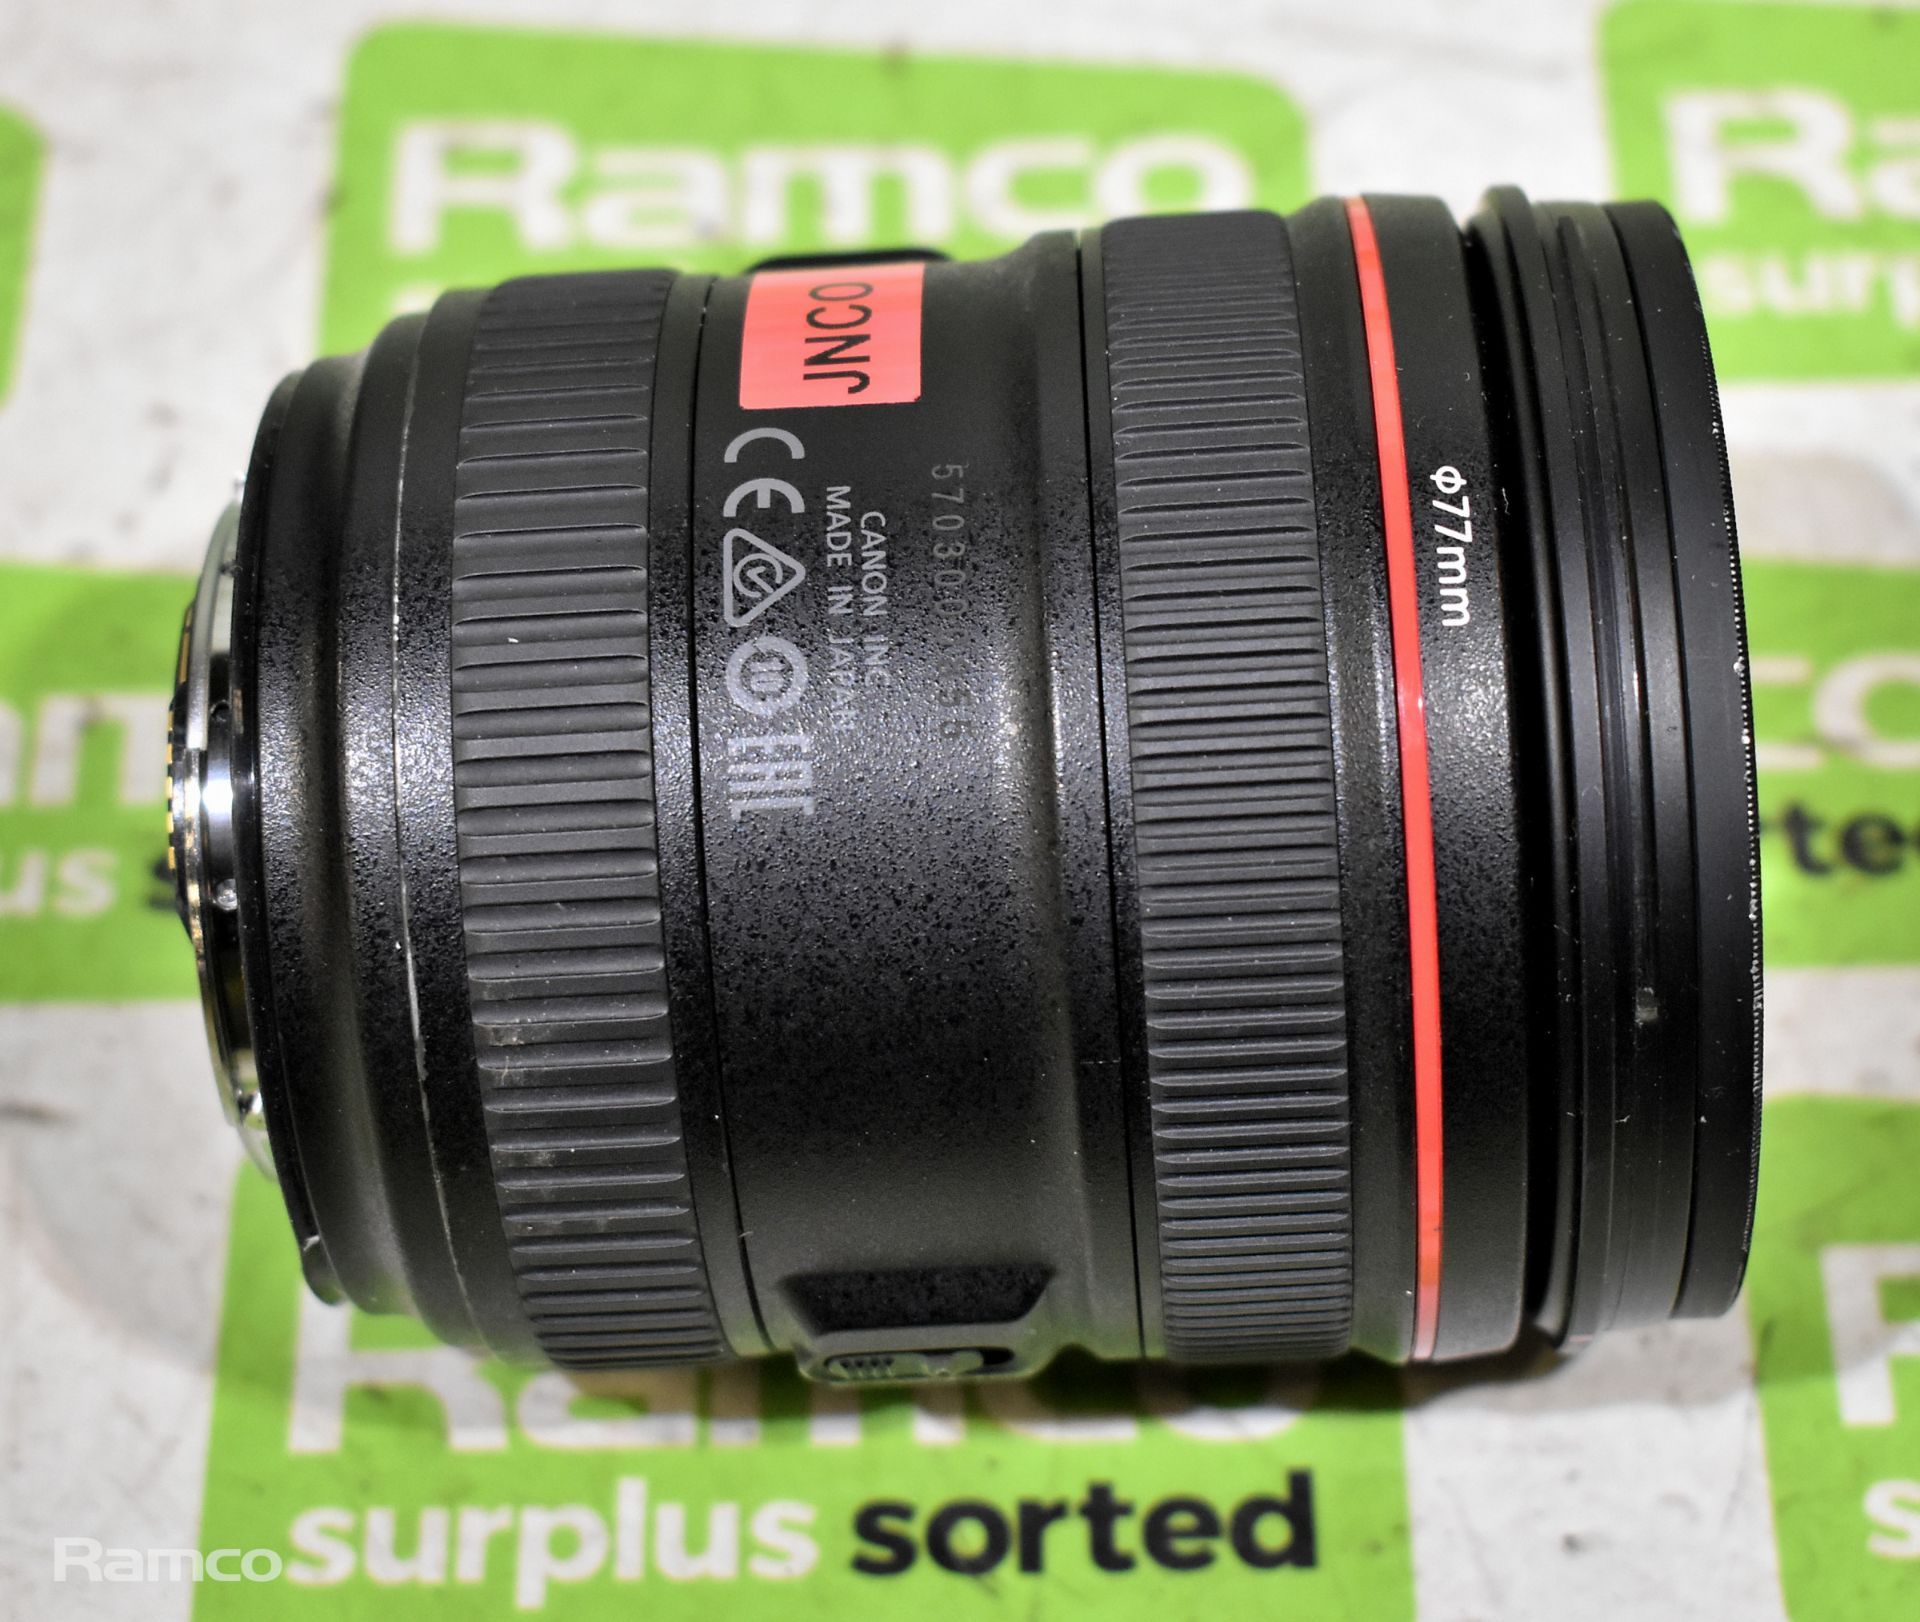 Canon EF 24-70mm F/2.8L ii USM lens - with box - Image 3 of 9